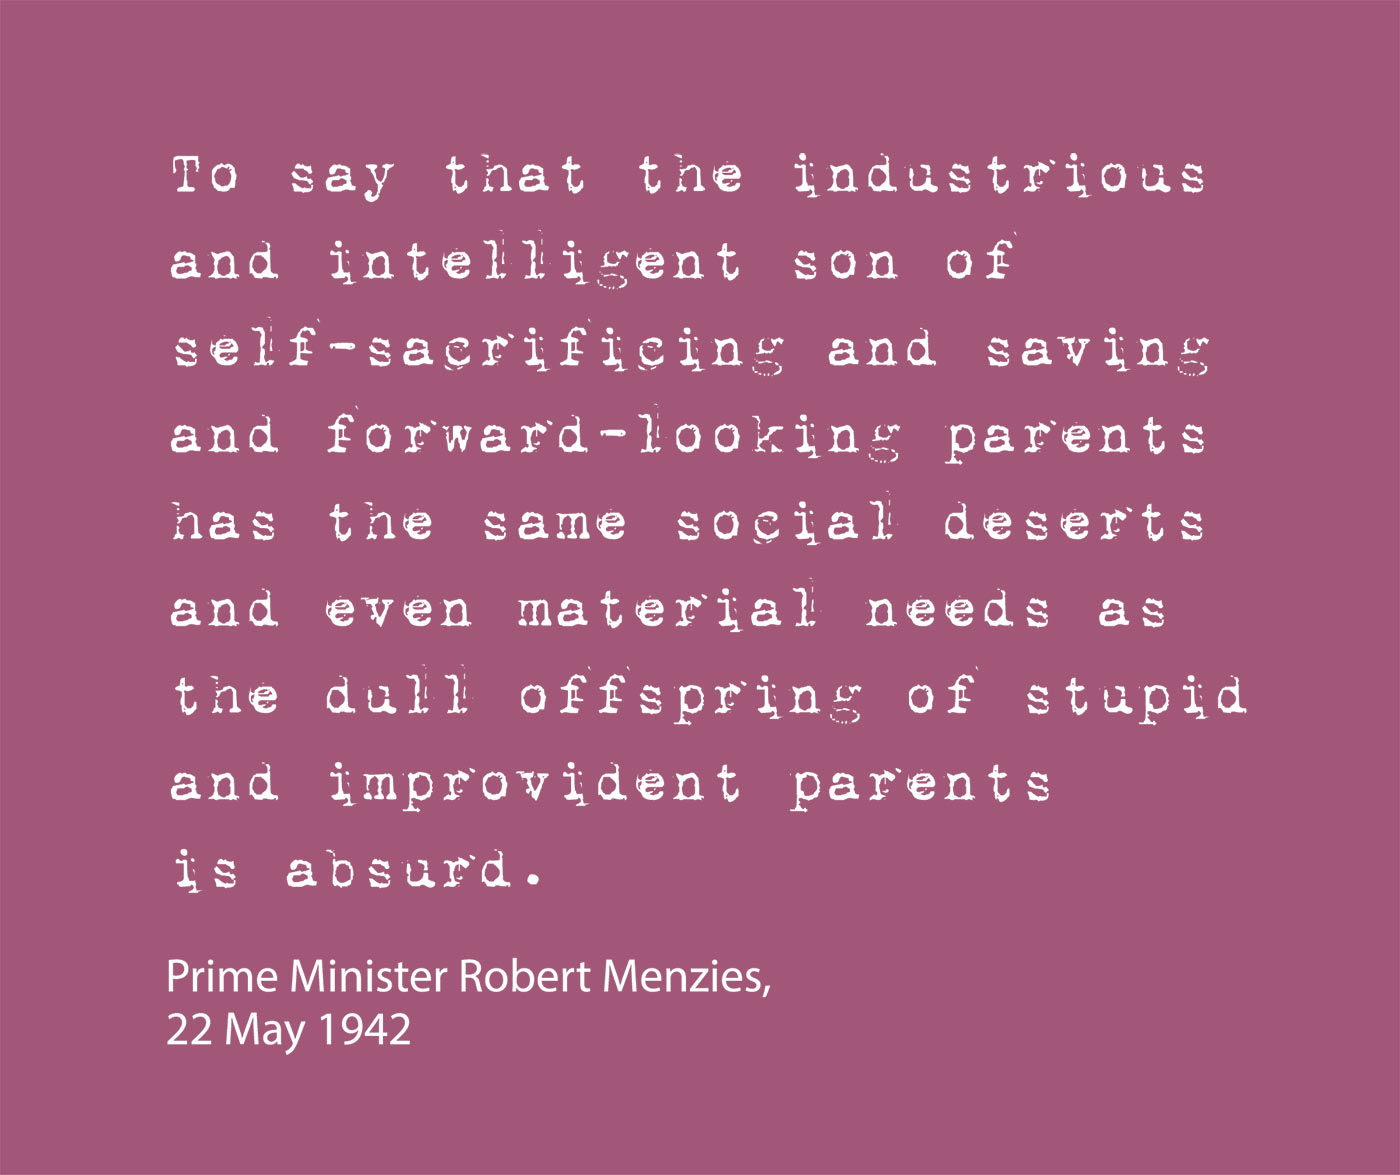 Exhibition graphic panel that reads: 'To say that the industrious and intelligent son of self-sacrificing and saving and forward-looking parents has the same social deserts and even material needs as the dull offspring of stupid and improvident parents is absurd', attributed to 'Prime Minister Robert Menzies, 22 May 1942'. - click to view larger image